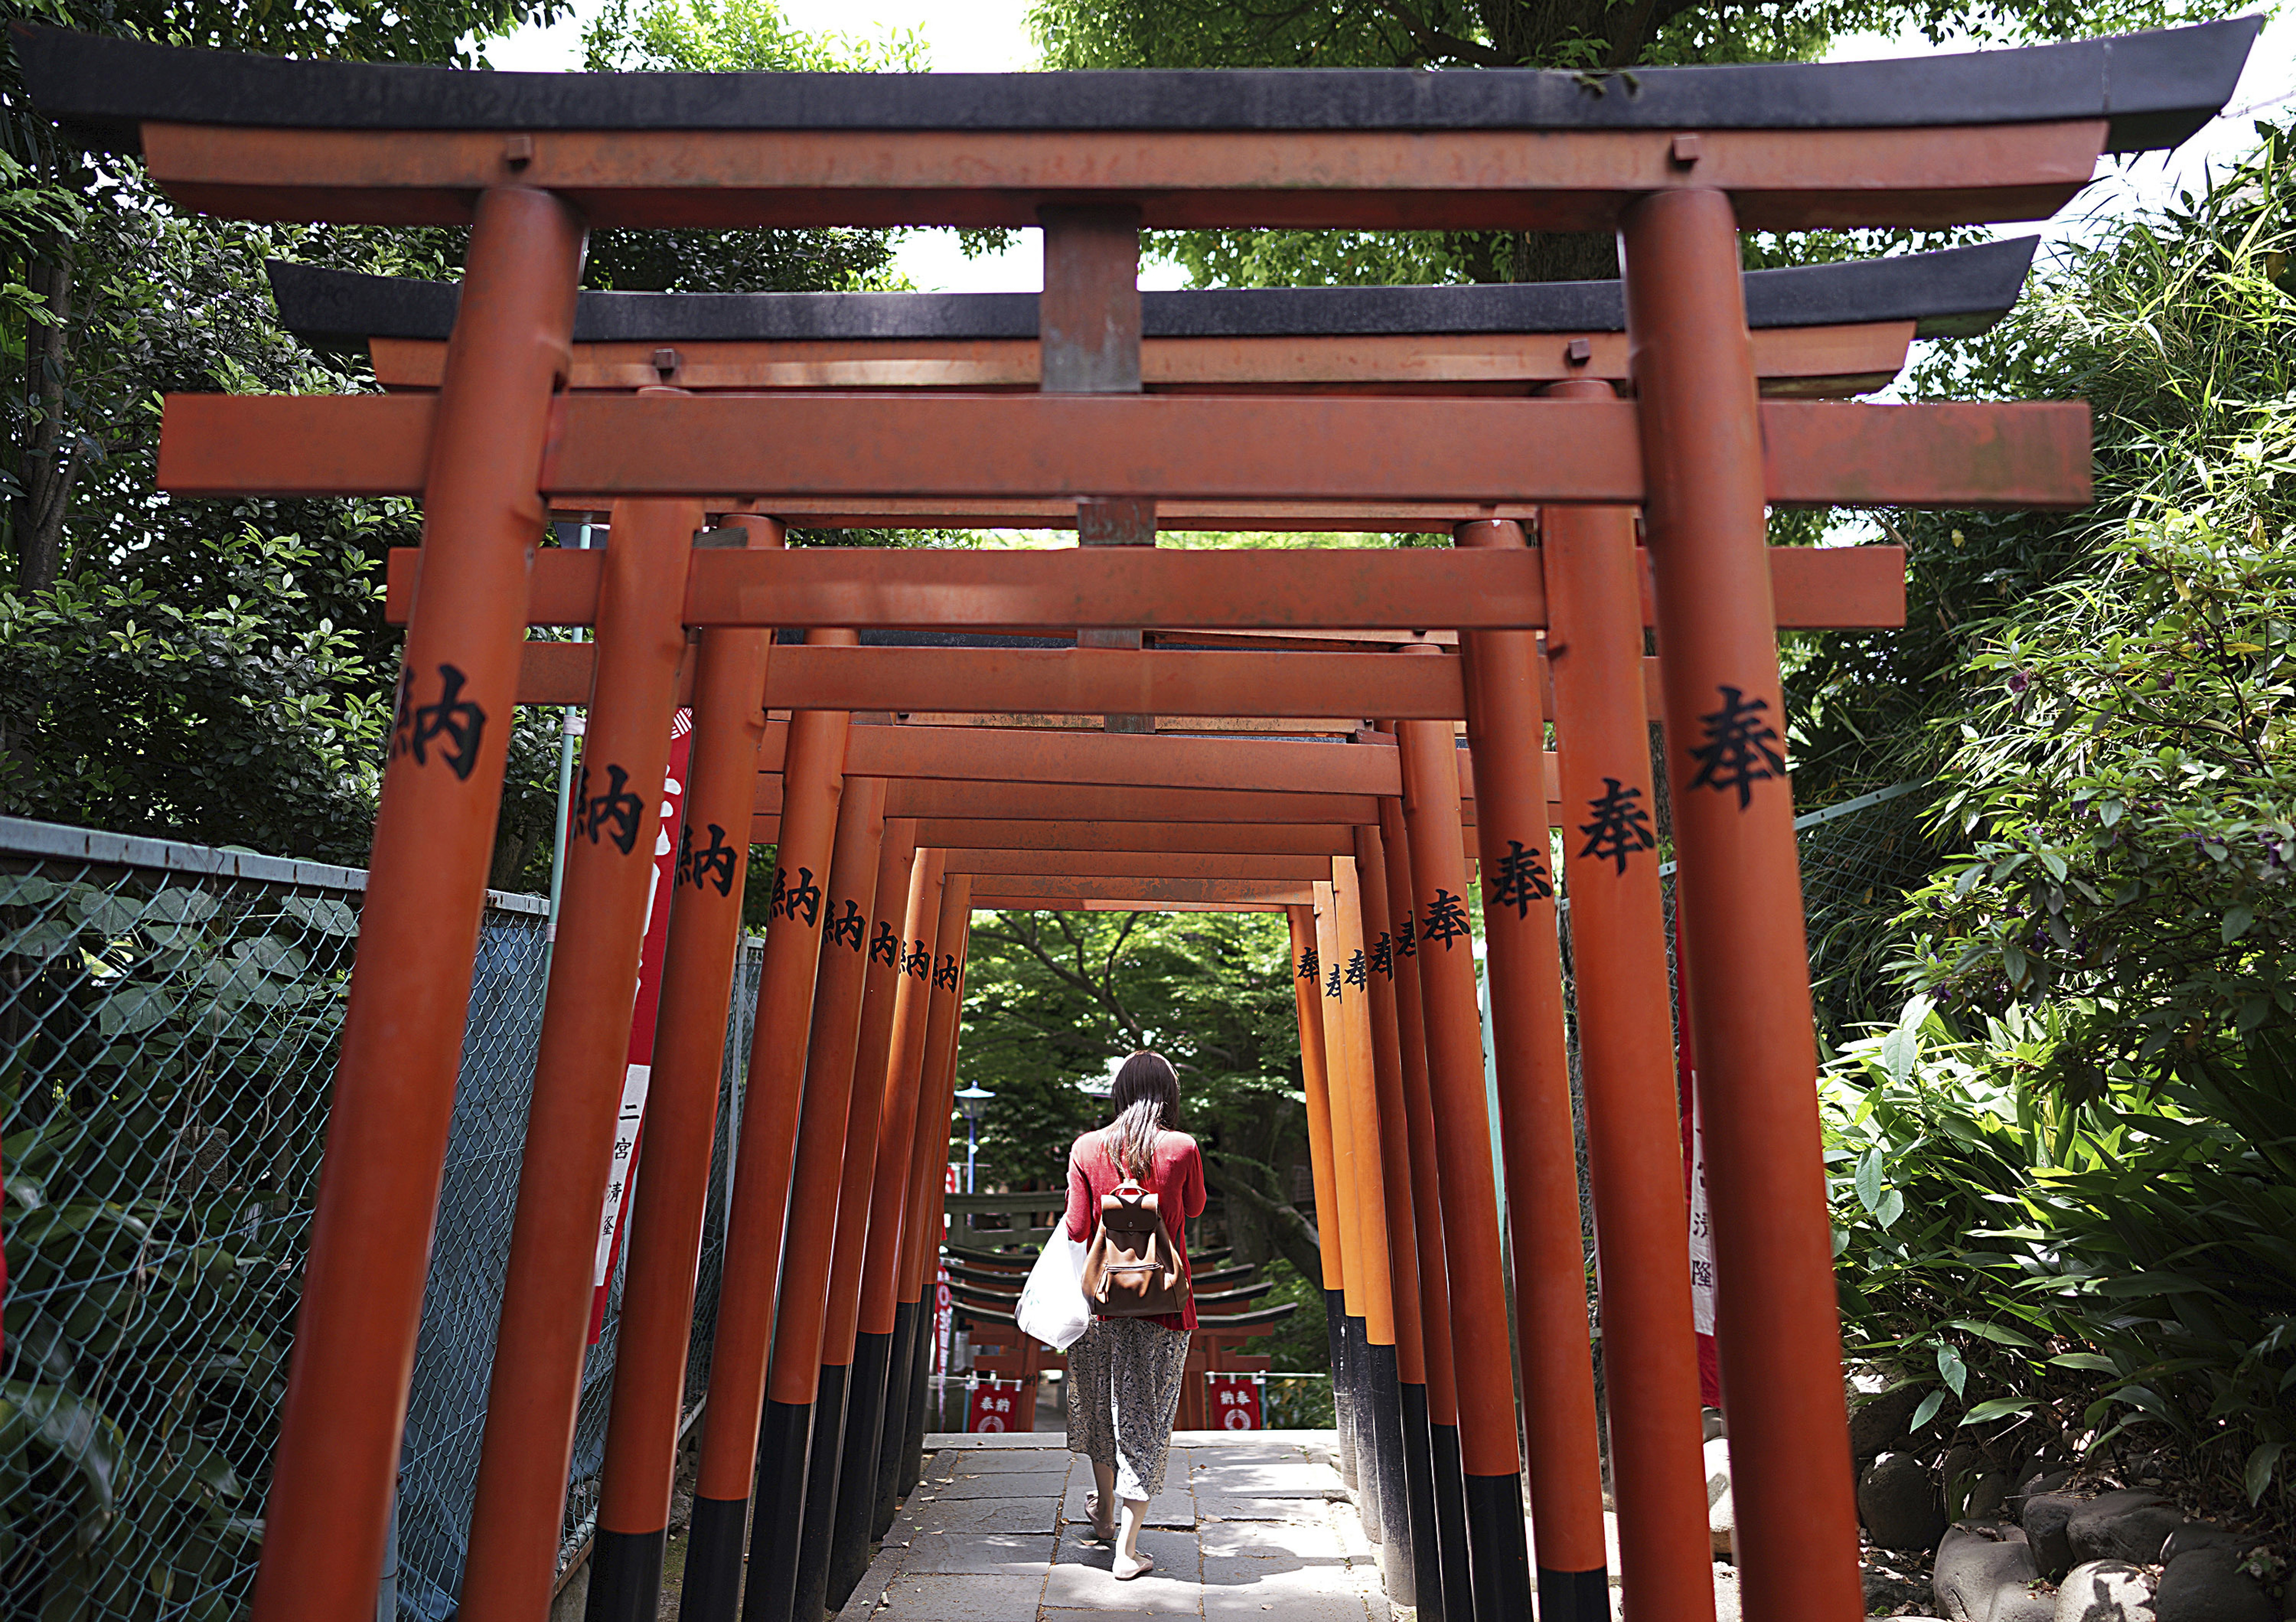 A visitor walks through a path lined with small shrine arches or 